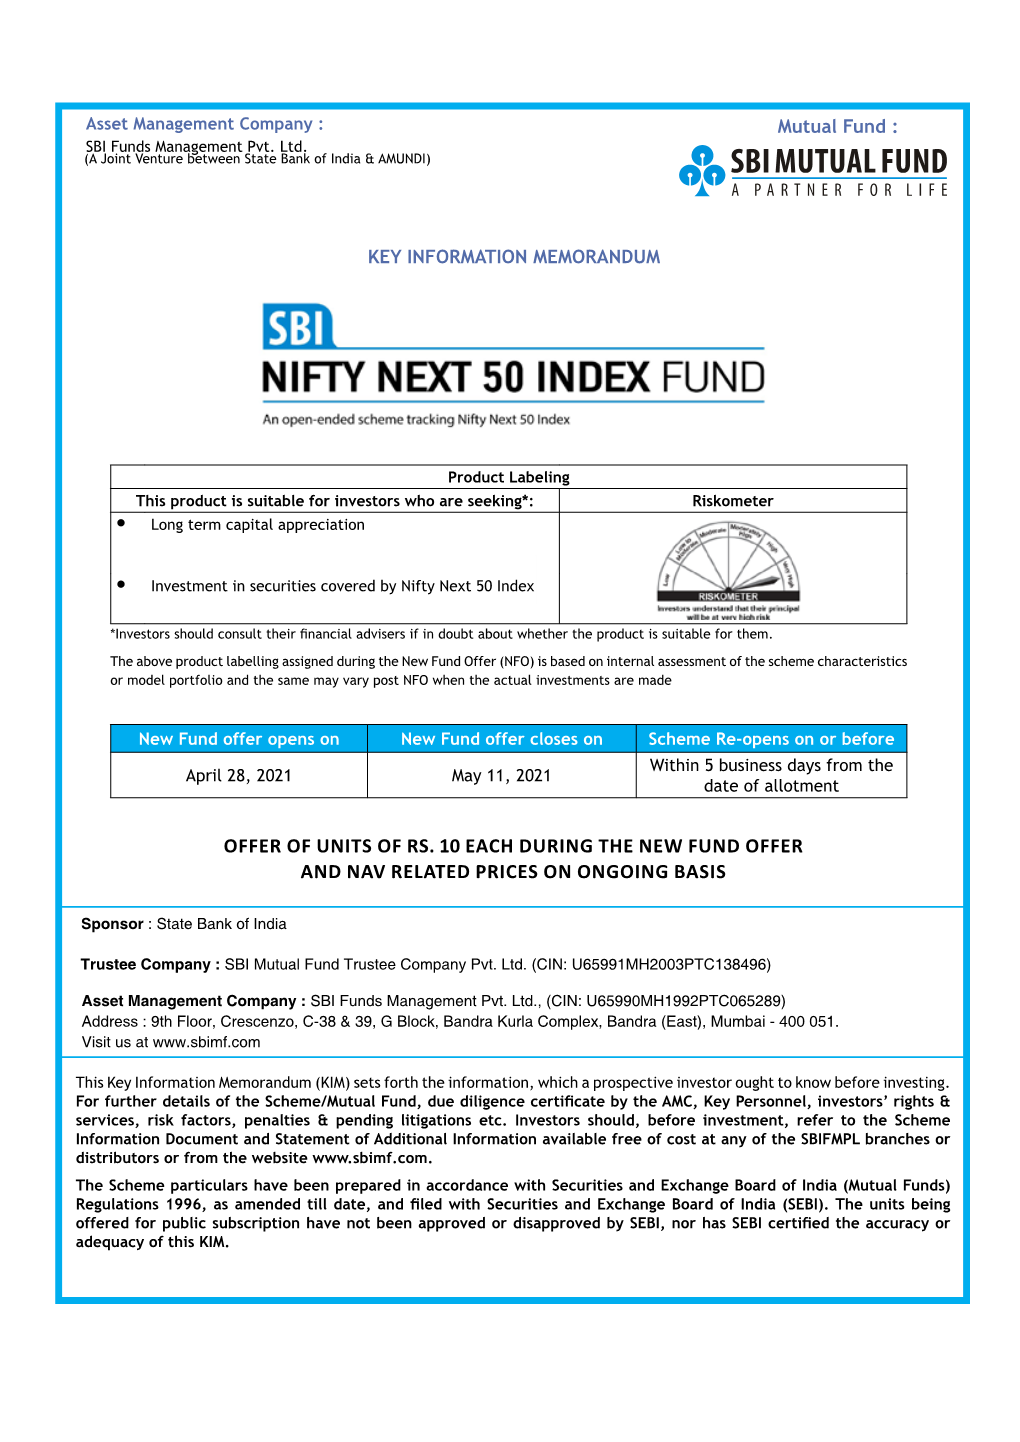 SBI Nifty Next 50 Index Fund (An Open-Ended Scheme Tracking Nifty Next 50 Index)